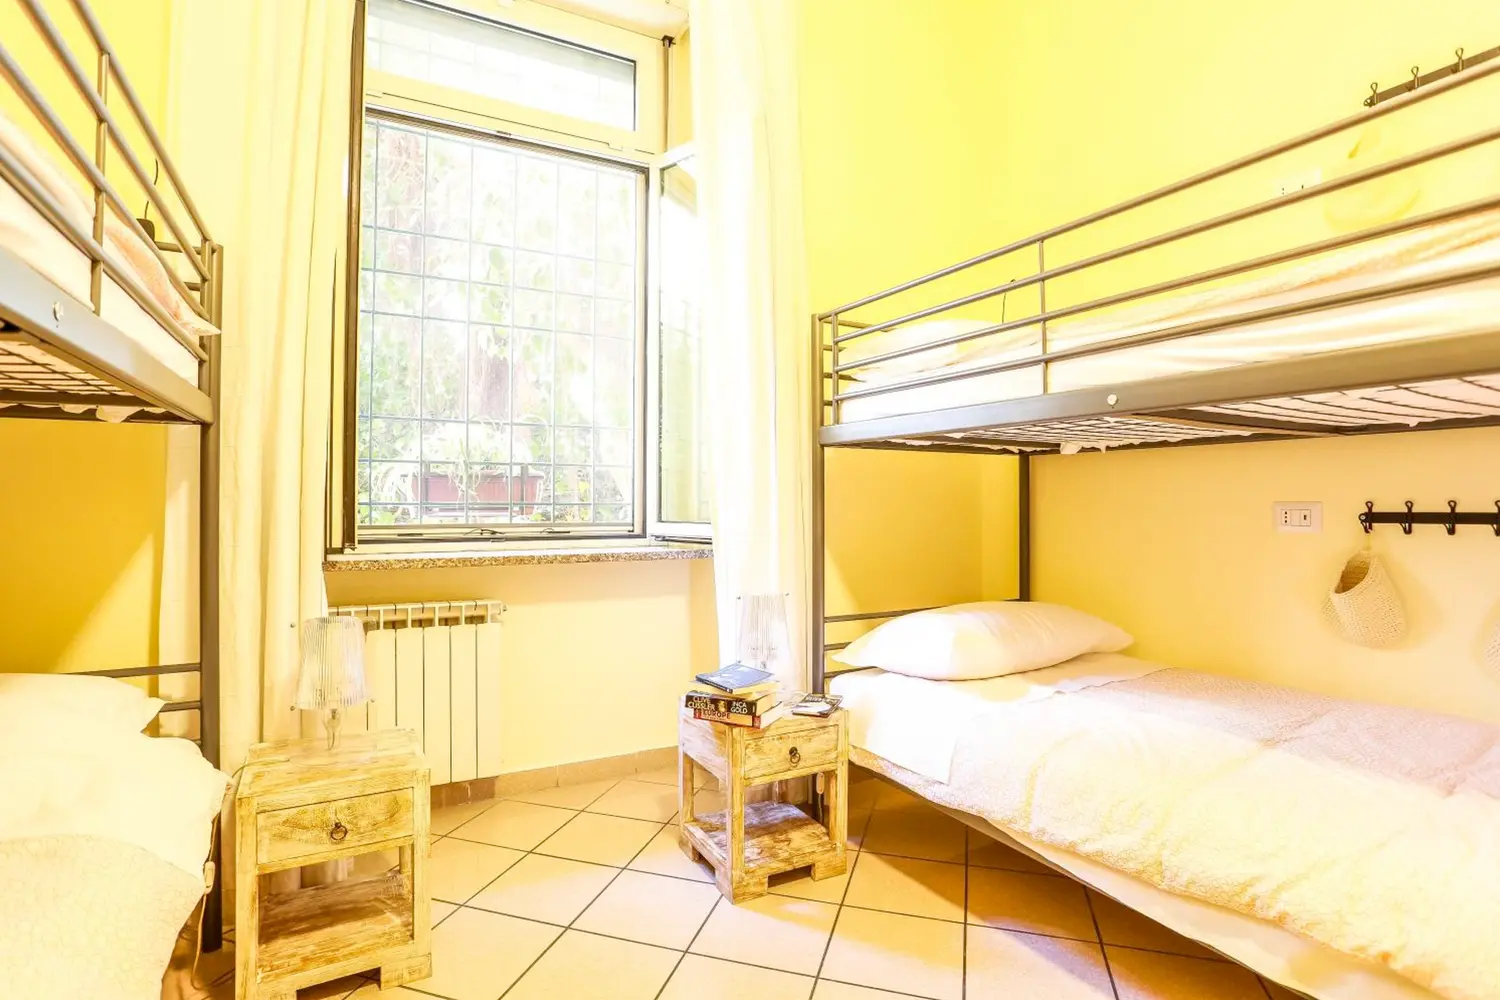 Dorm room at The Beehive hostel in Rome, Italy